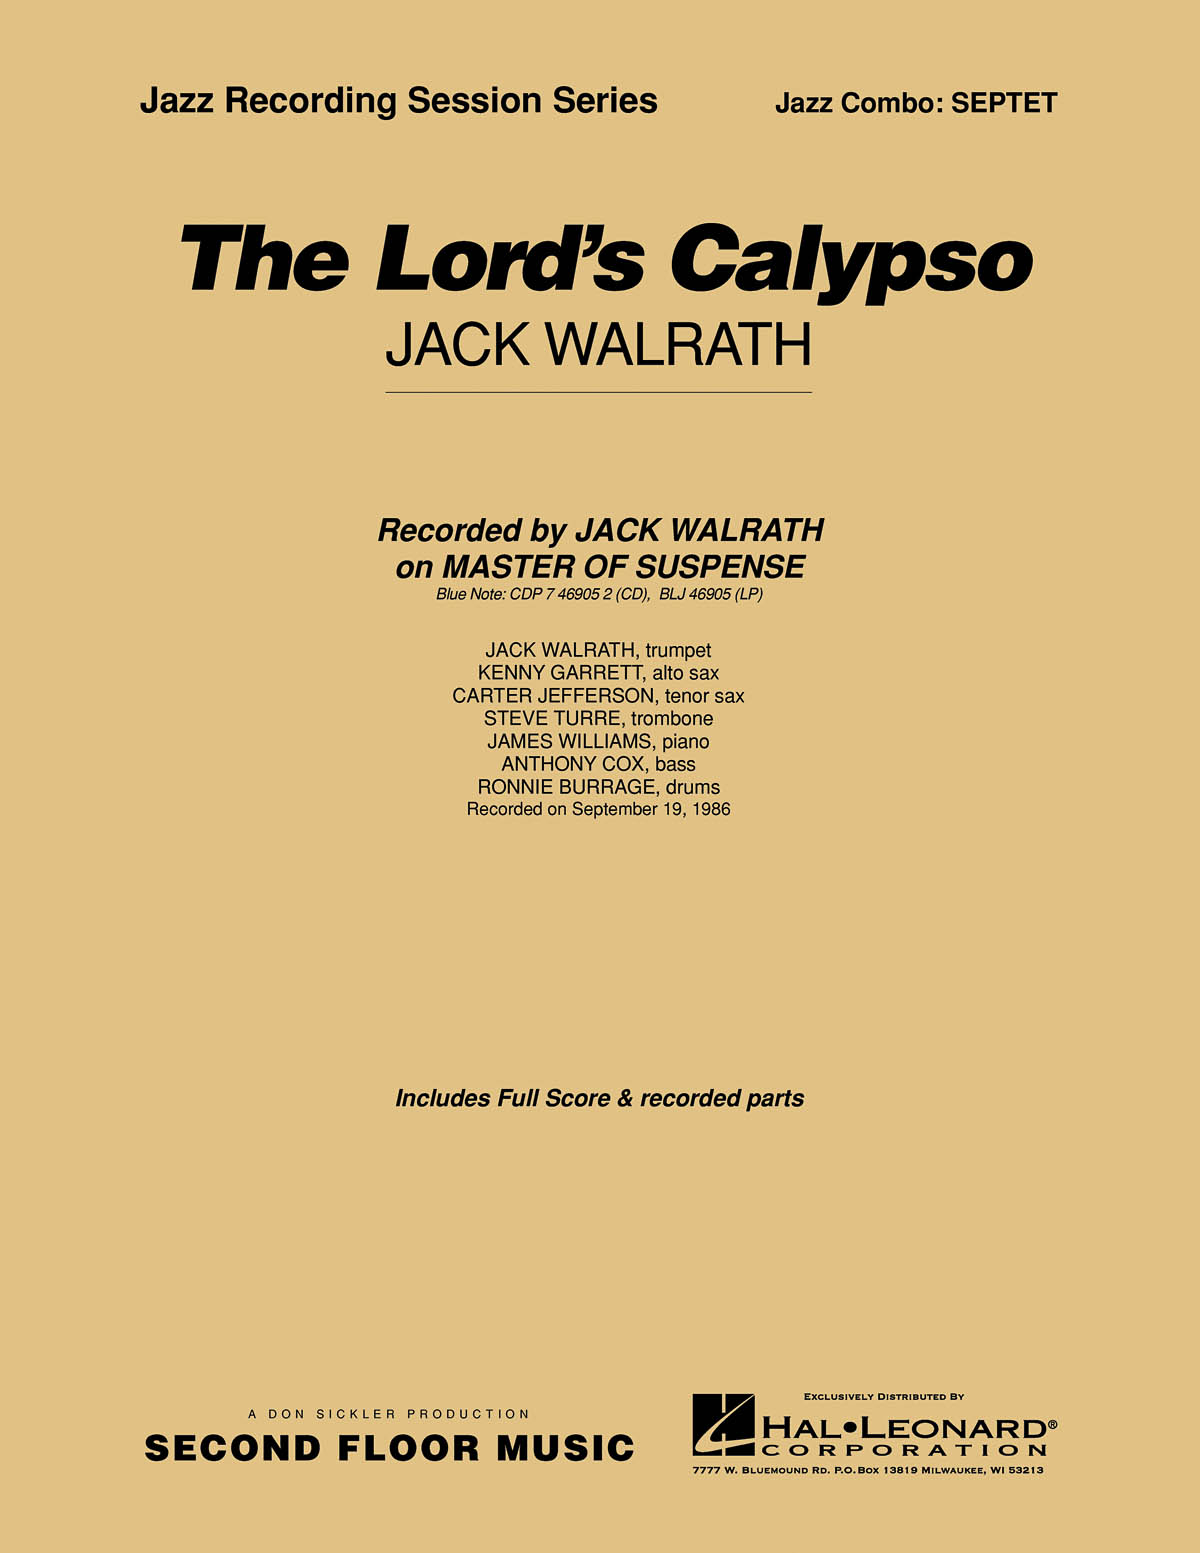 The Lord’s Calypso